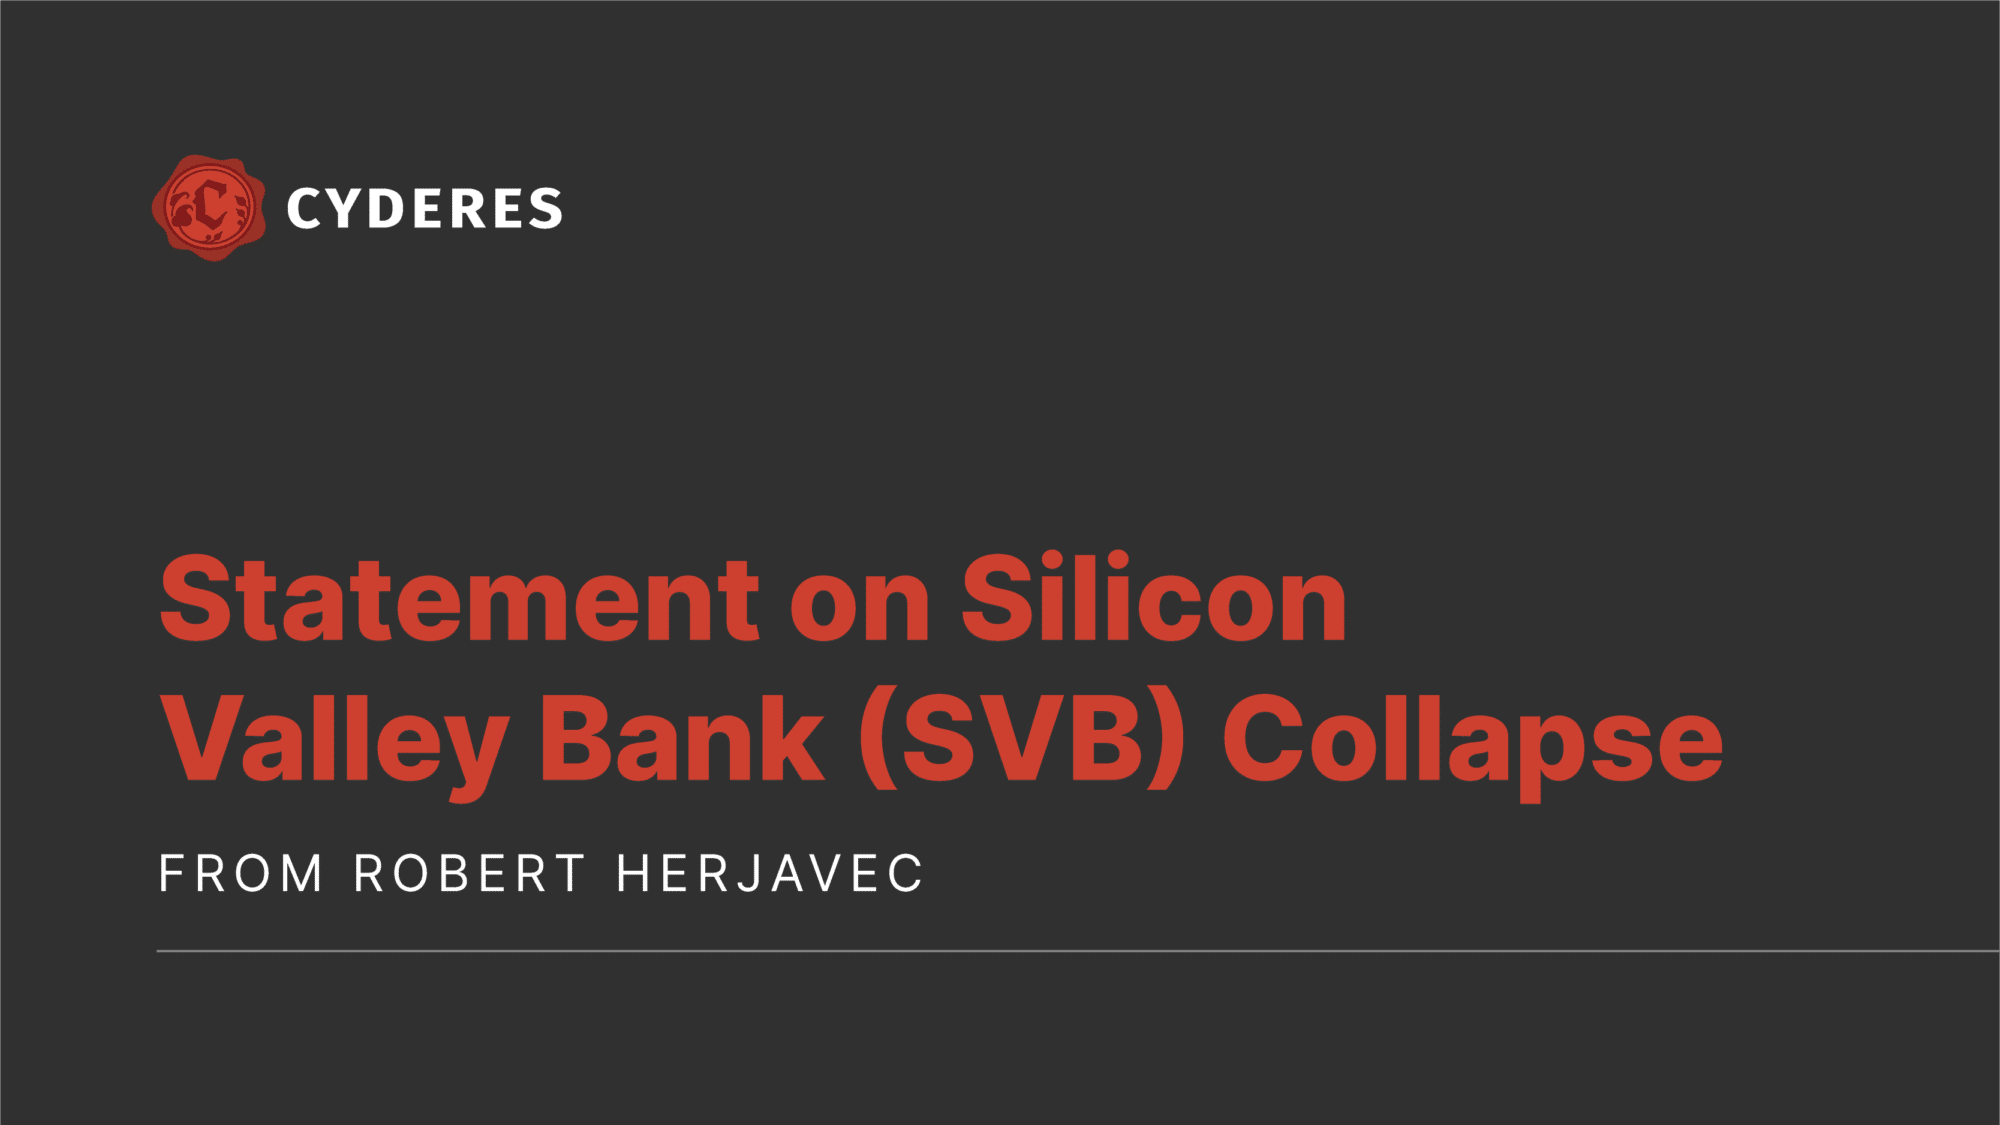 Cyderes CEO Robert Herjavec Speaks to Recent Events at Silicon Valley Bank